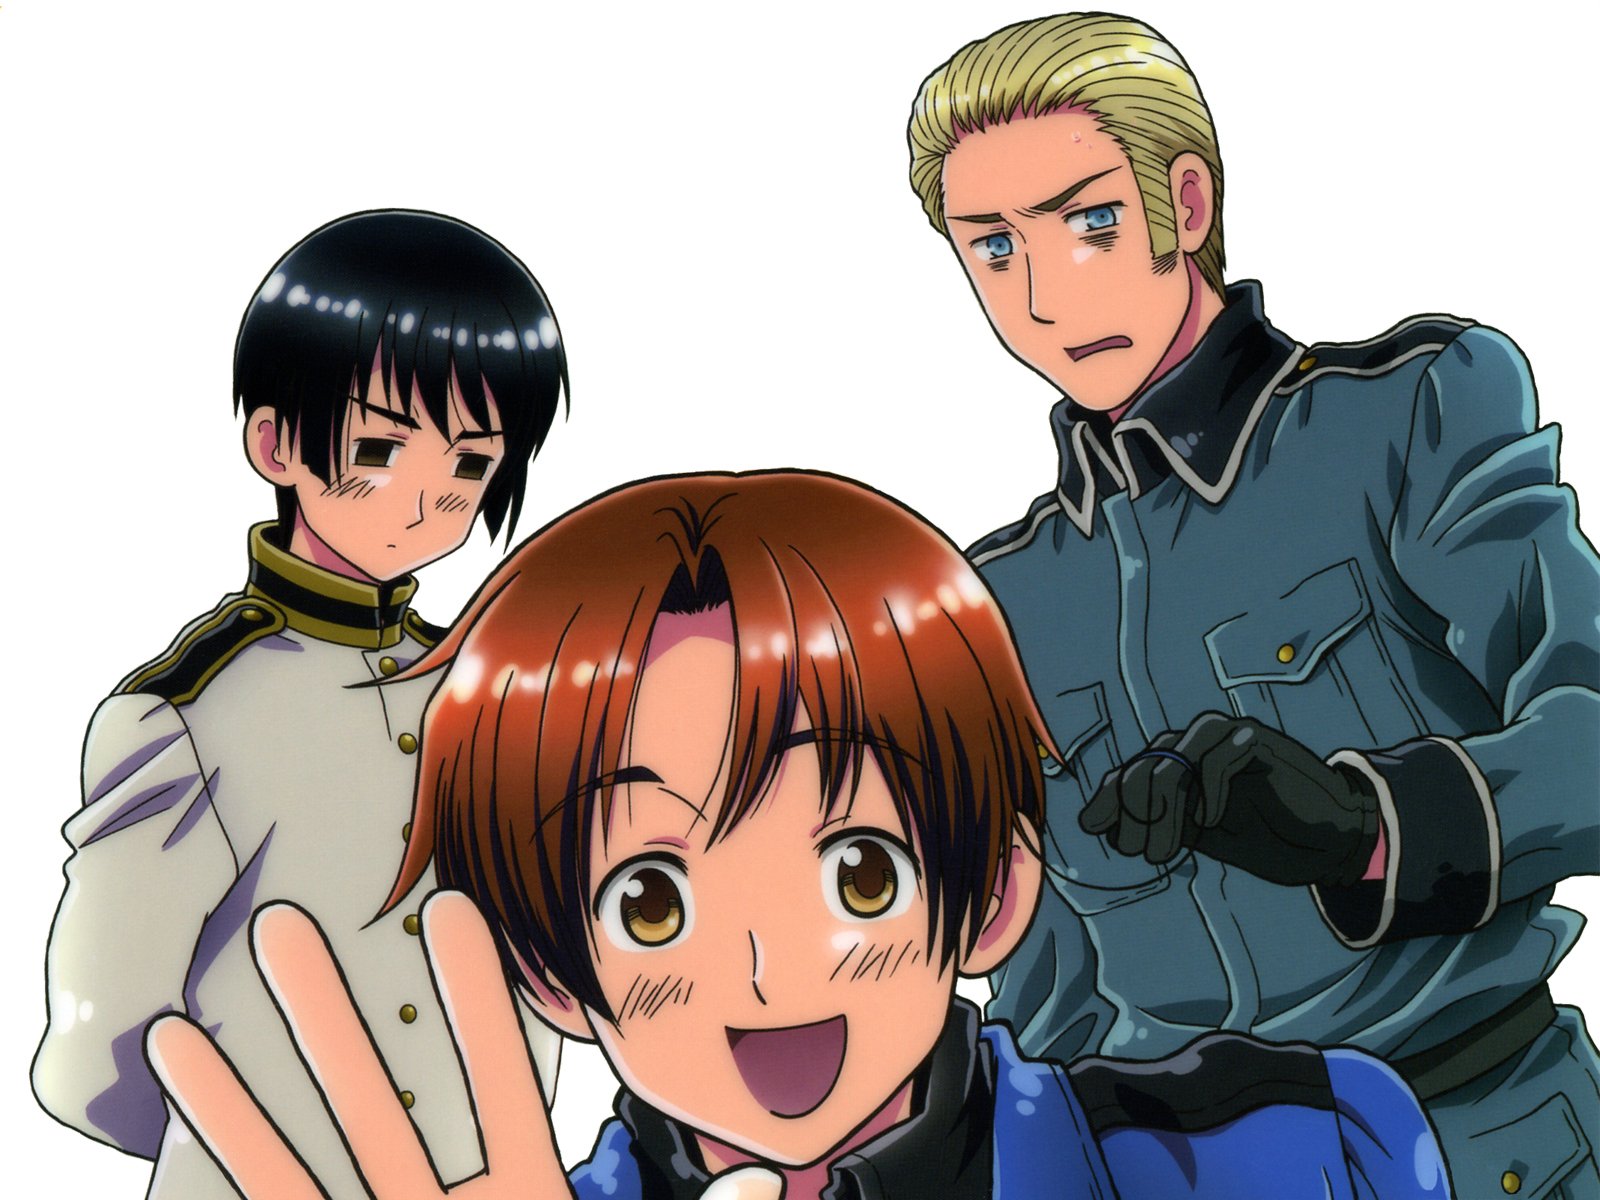 Hetalia Axis Power Characters with A Creative History Lesson